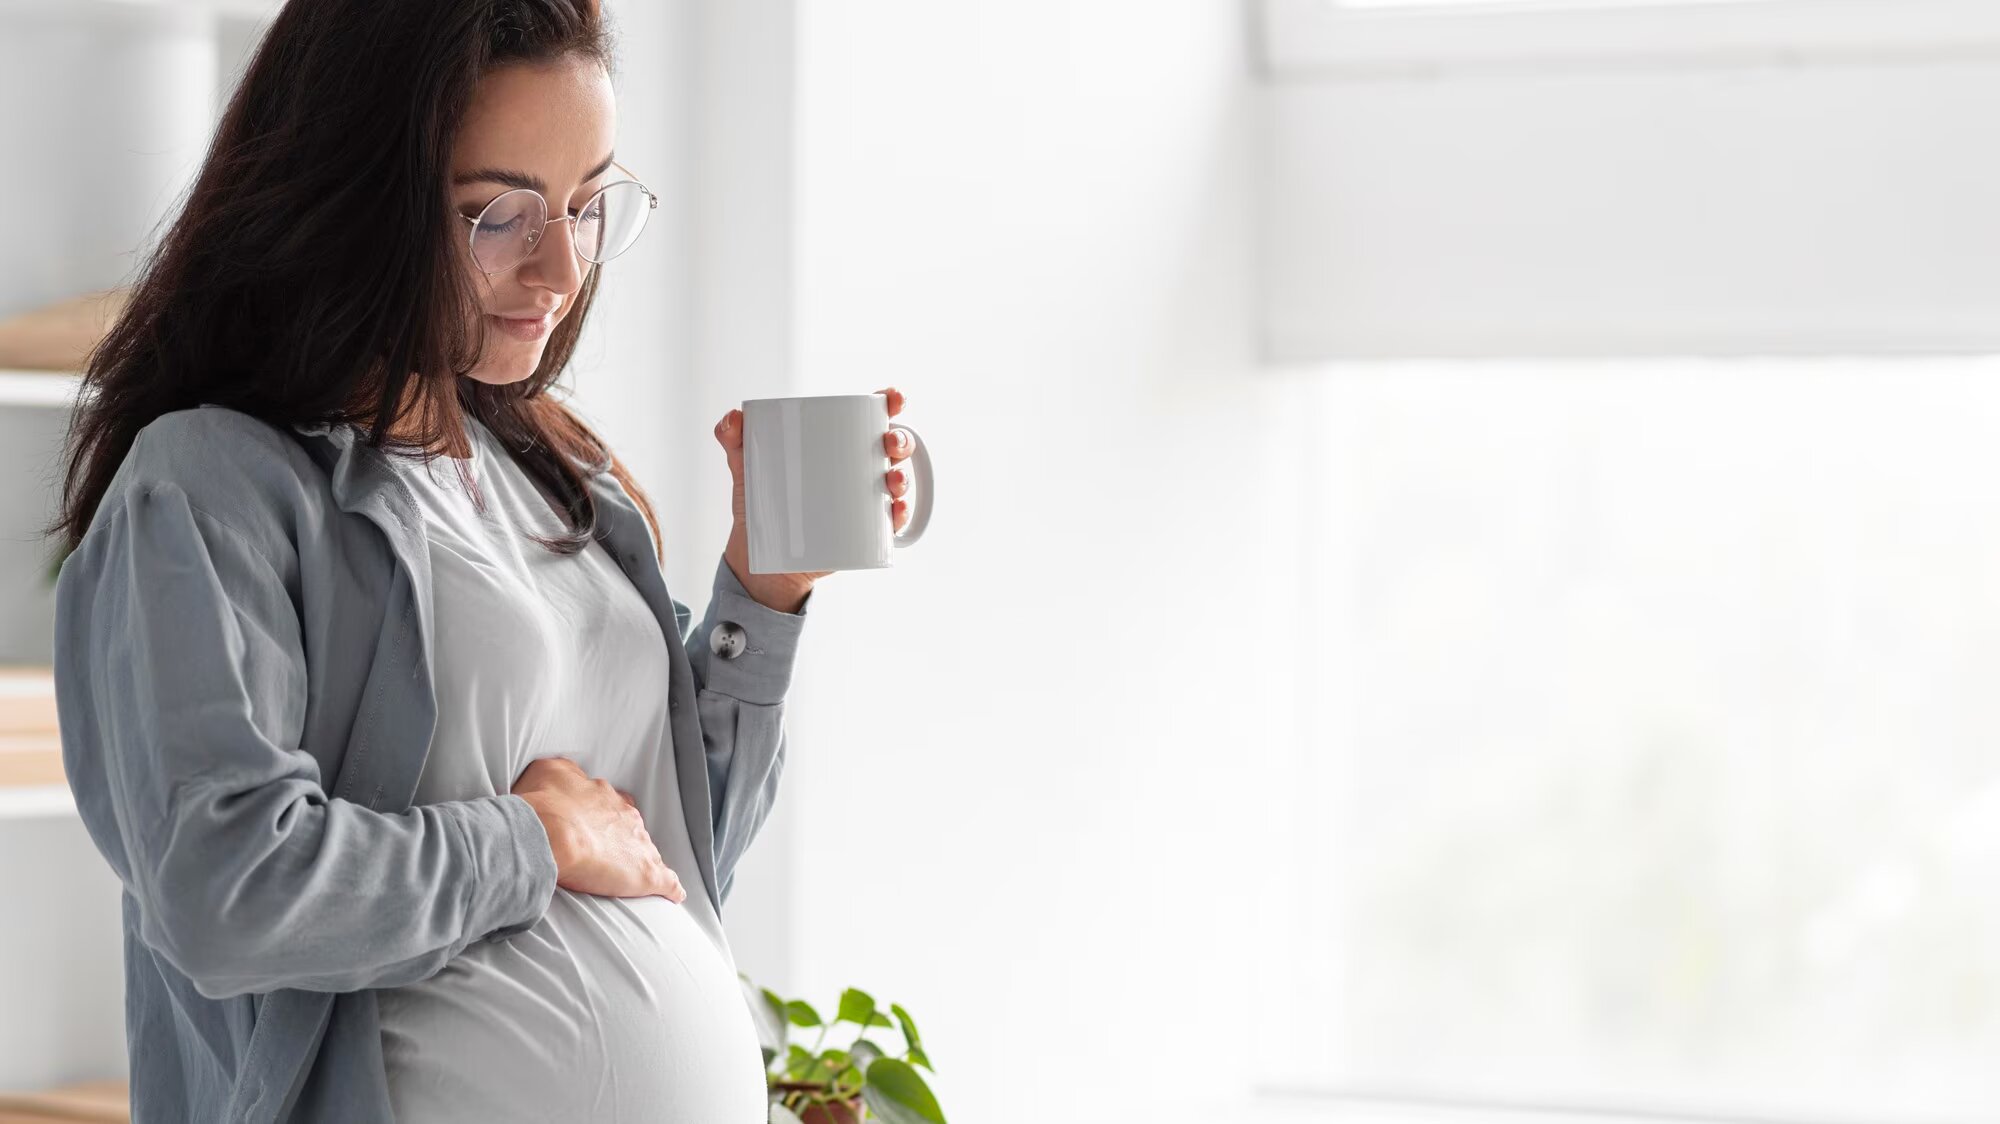 side-view-of-pregnant-woman-at-home-with-mug-of-coffee_23-2148765061.jpg.jpg